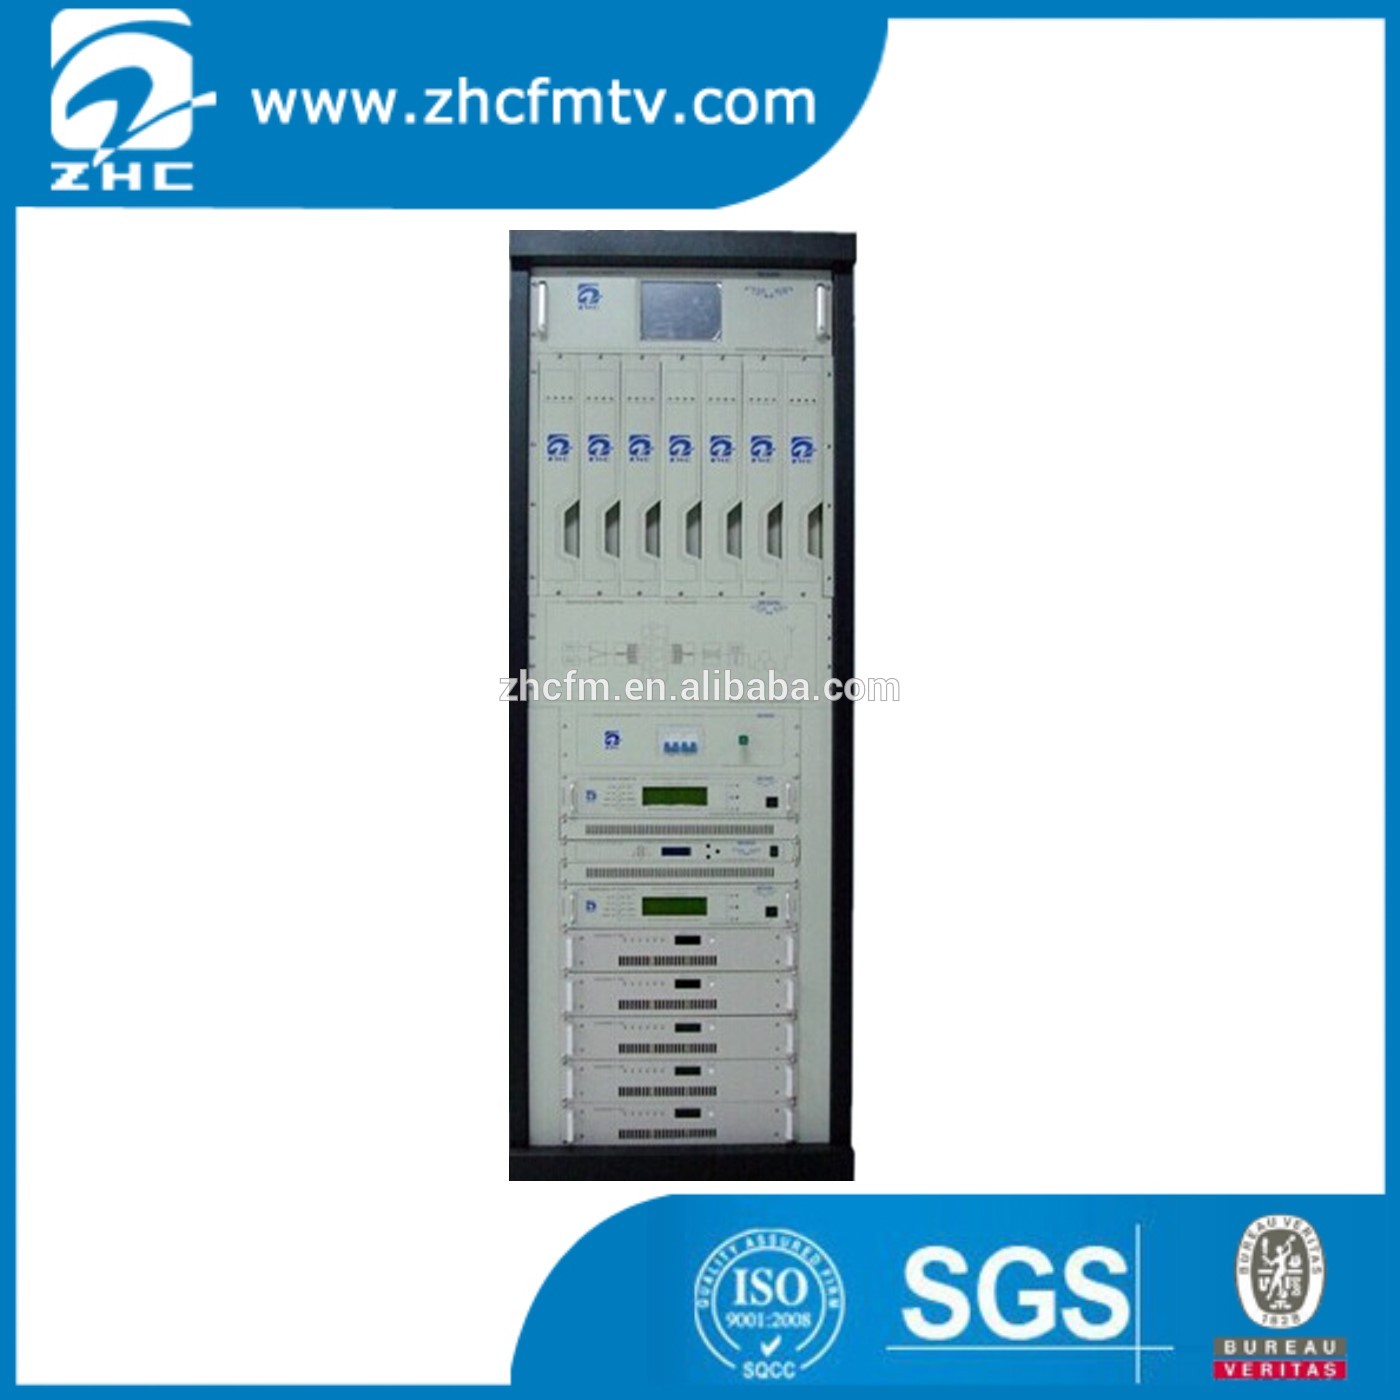 5kw Tv Transmitter, 5kw Tv Transmitter Suppliers and Manufacturers ...